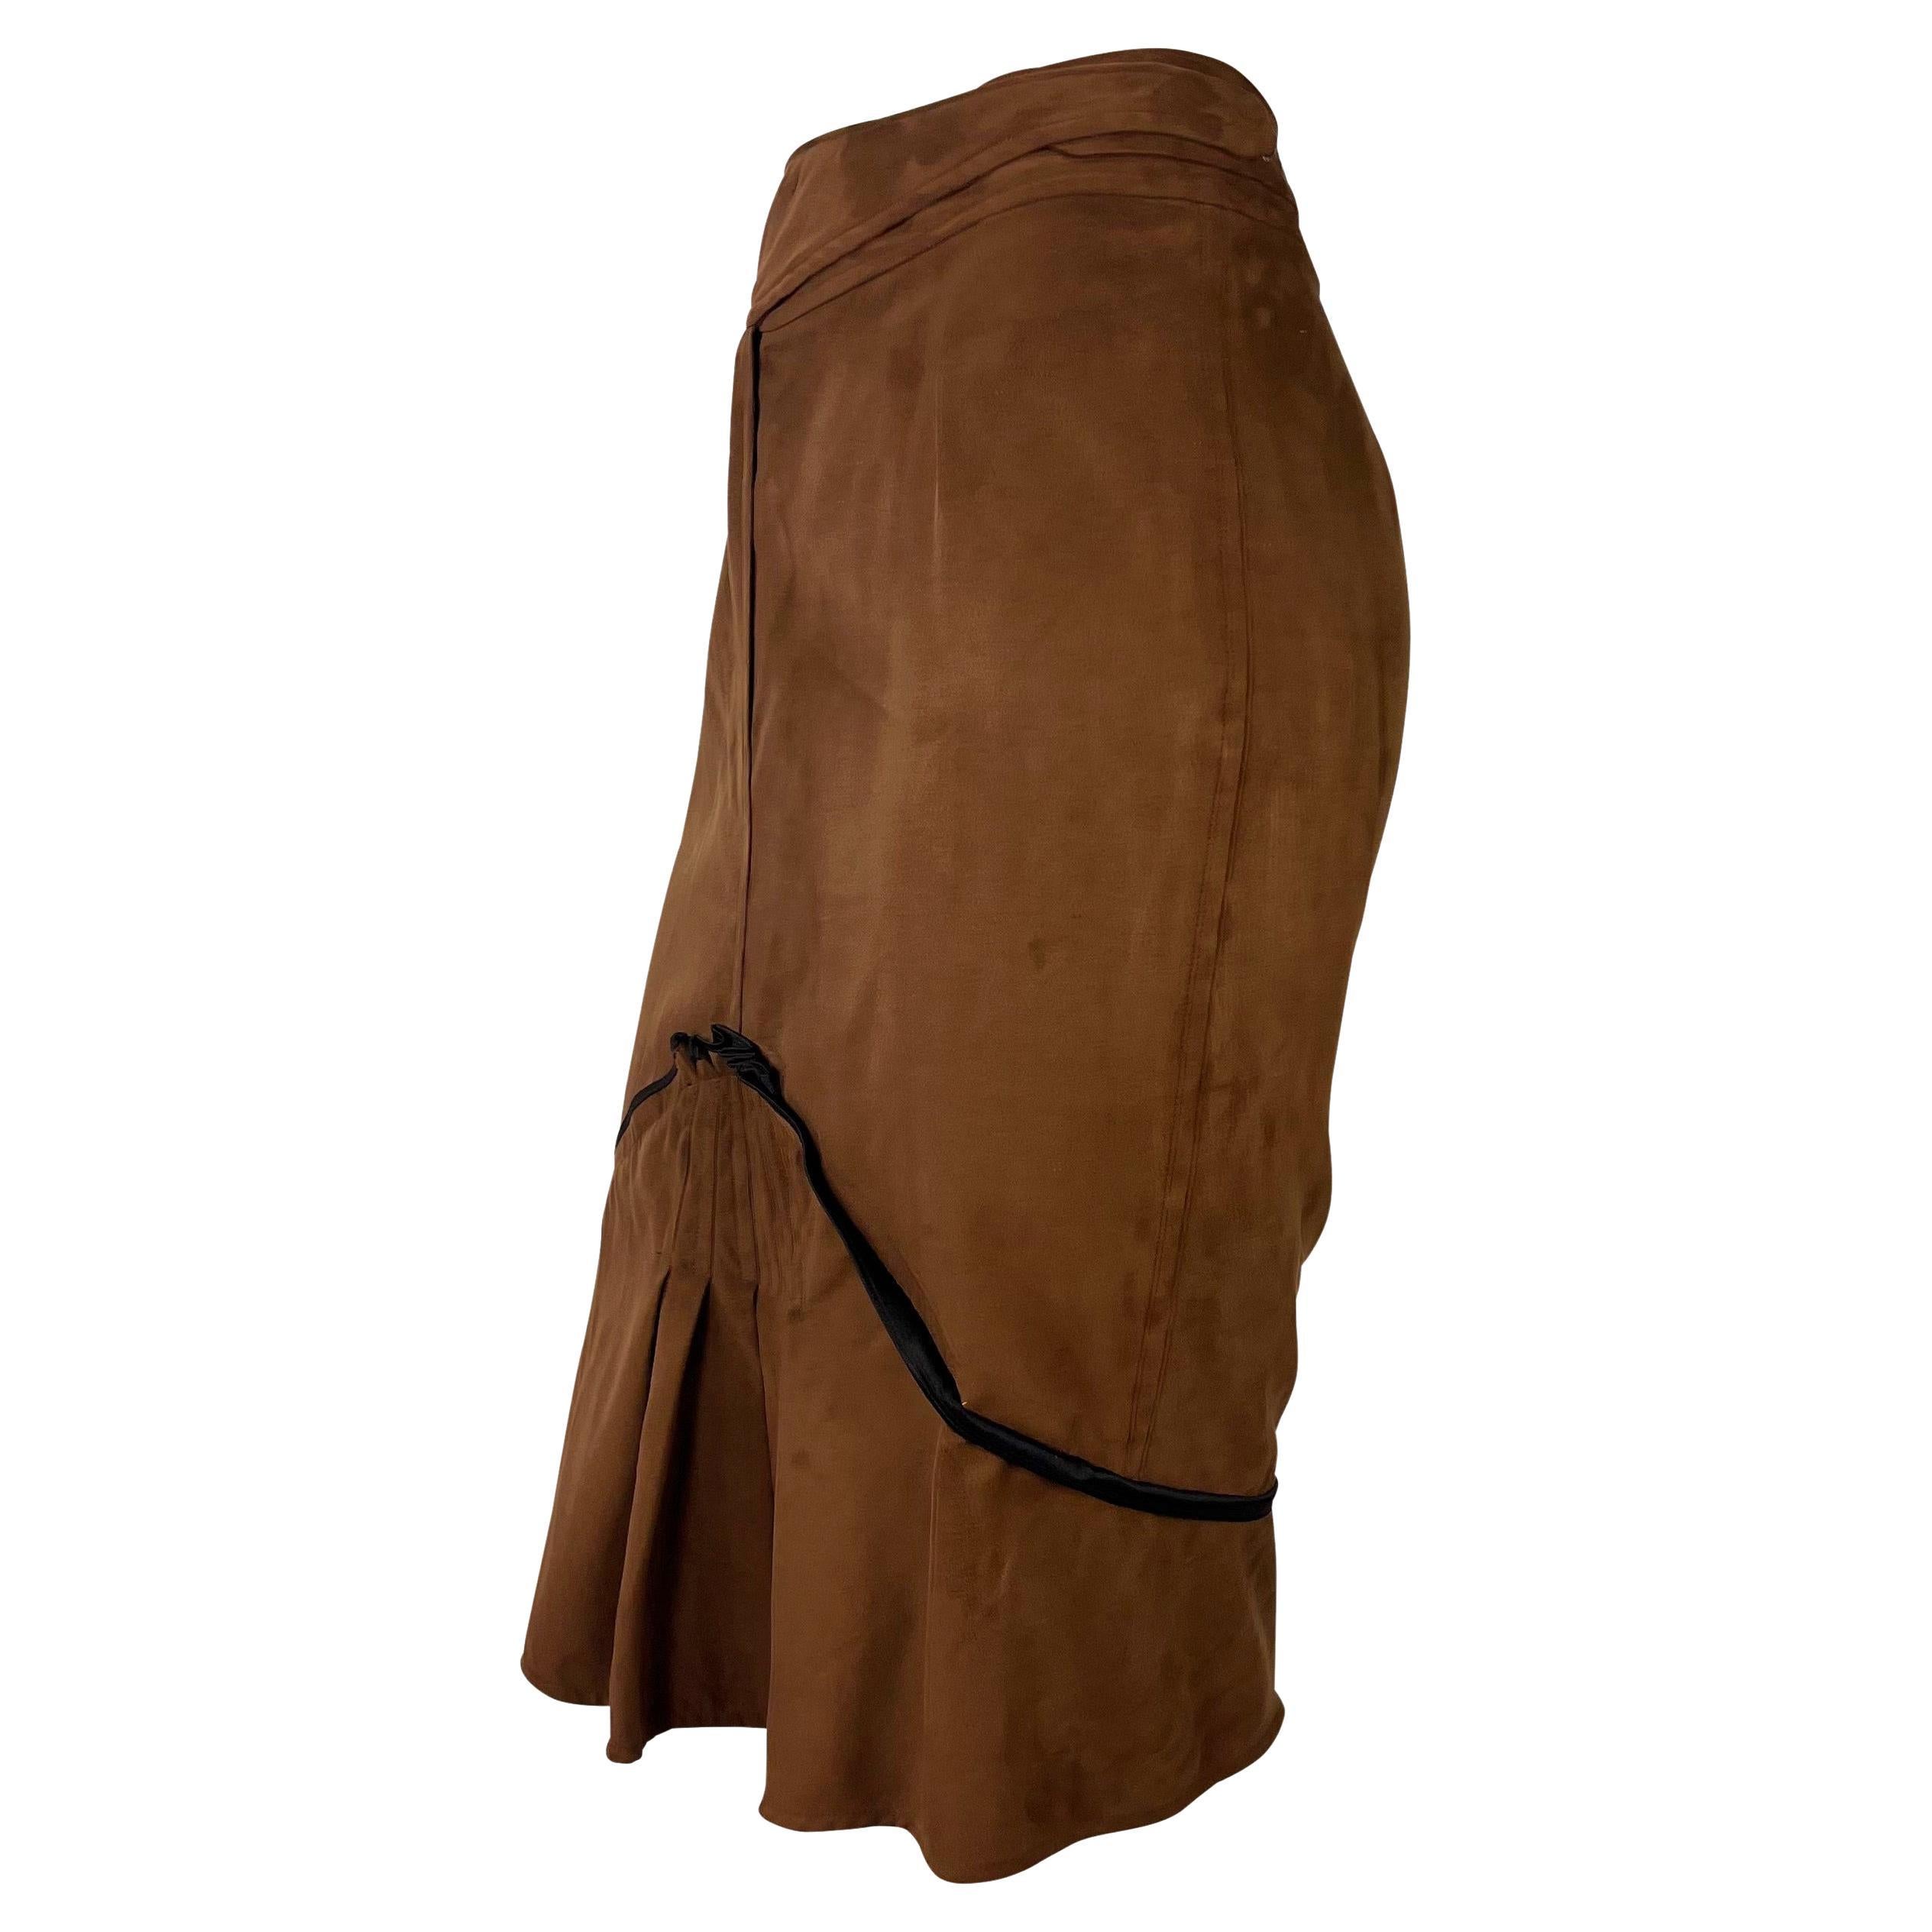 TheRealList presents: a cross-over brown vegan suede skirt designed by Tom Ford for Yves Saint Laurent Rive Gauche's Spring/Summer 2003 collection. Many of the looks on the season's runway featured the same brown microsuede fabric. Eyelets and hooks